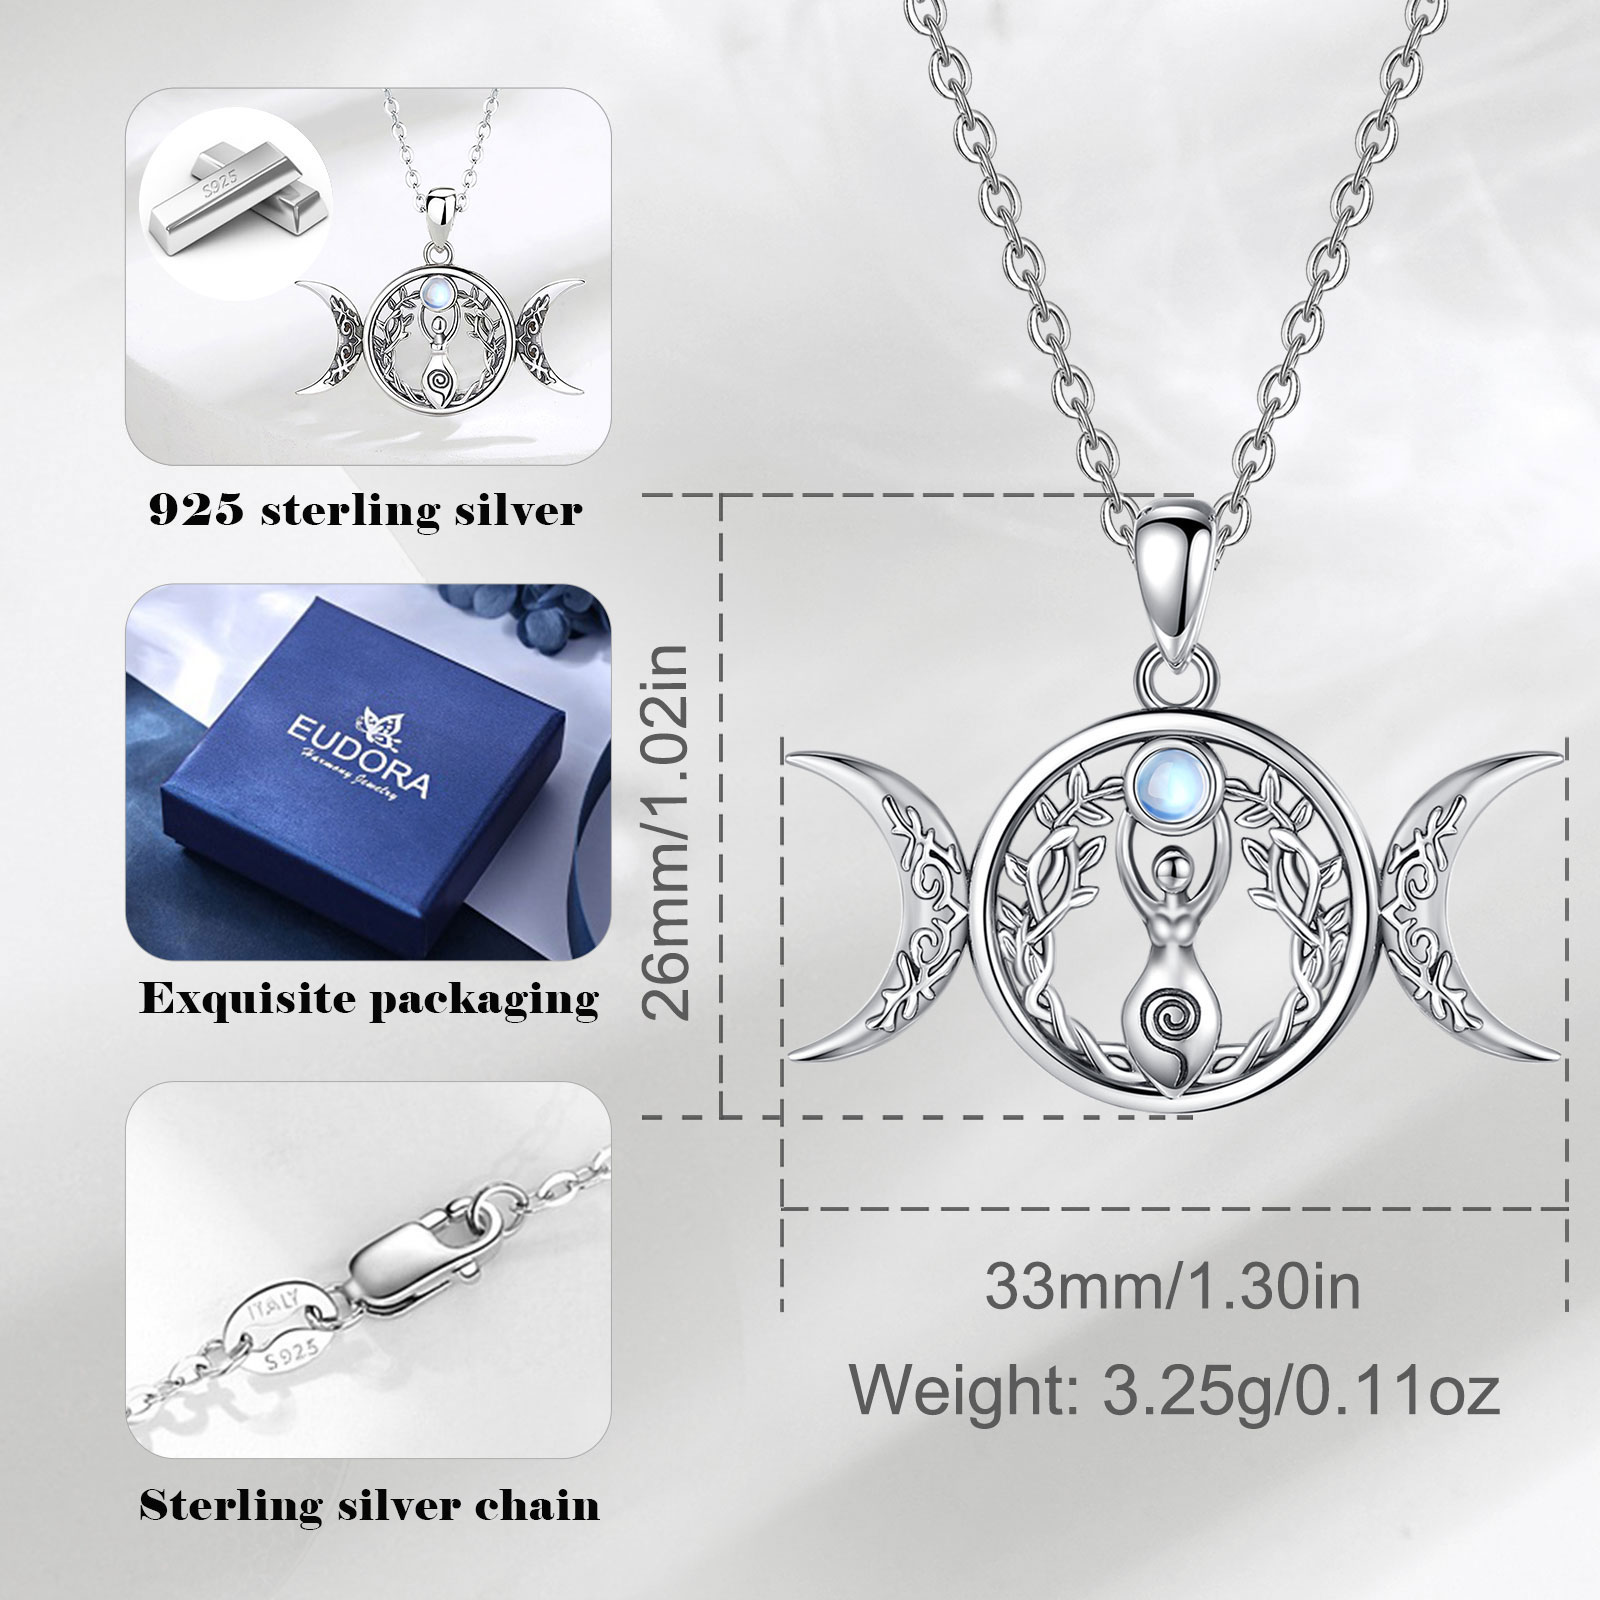 Eudora 925 Sterling Silver Triple Moon Goddess Necklace for Women Man Moonstone Tree of Life Amulet Pendant Witch Jewelry Gift